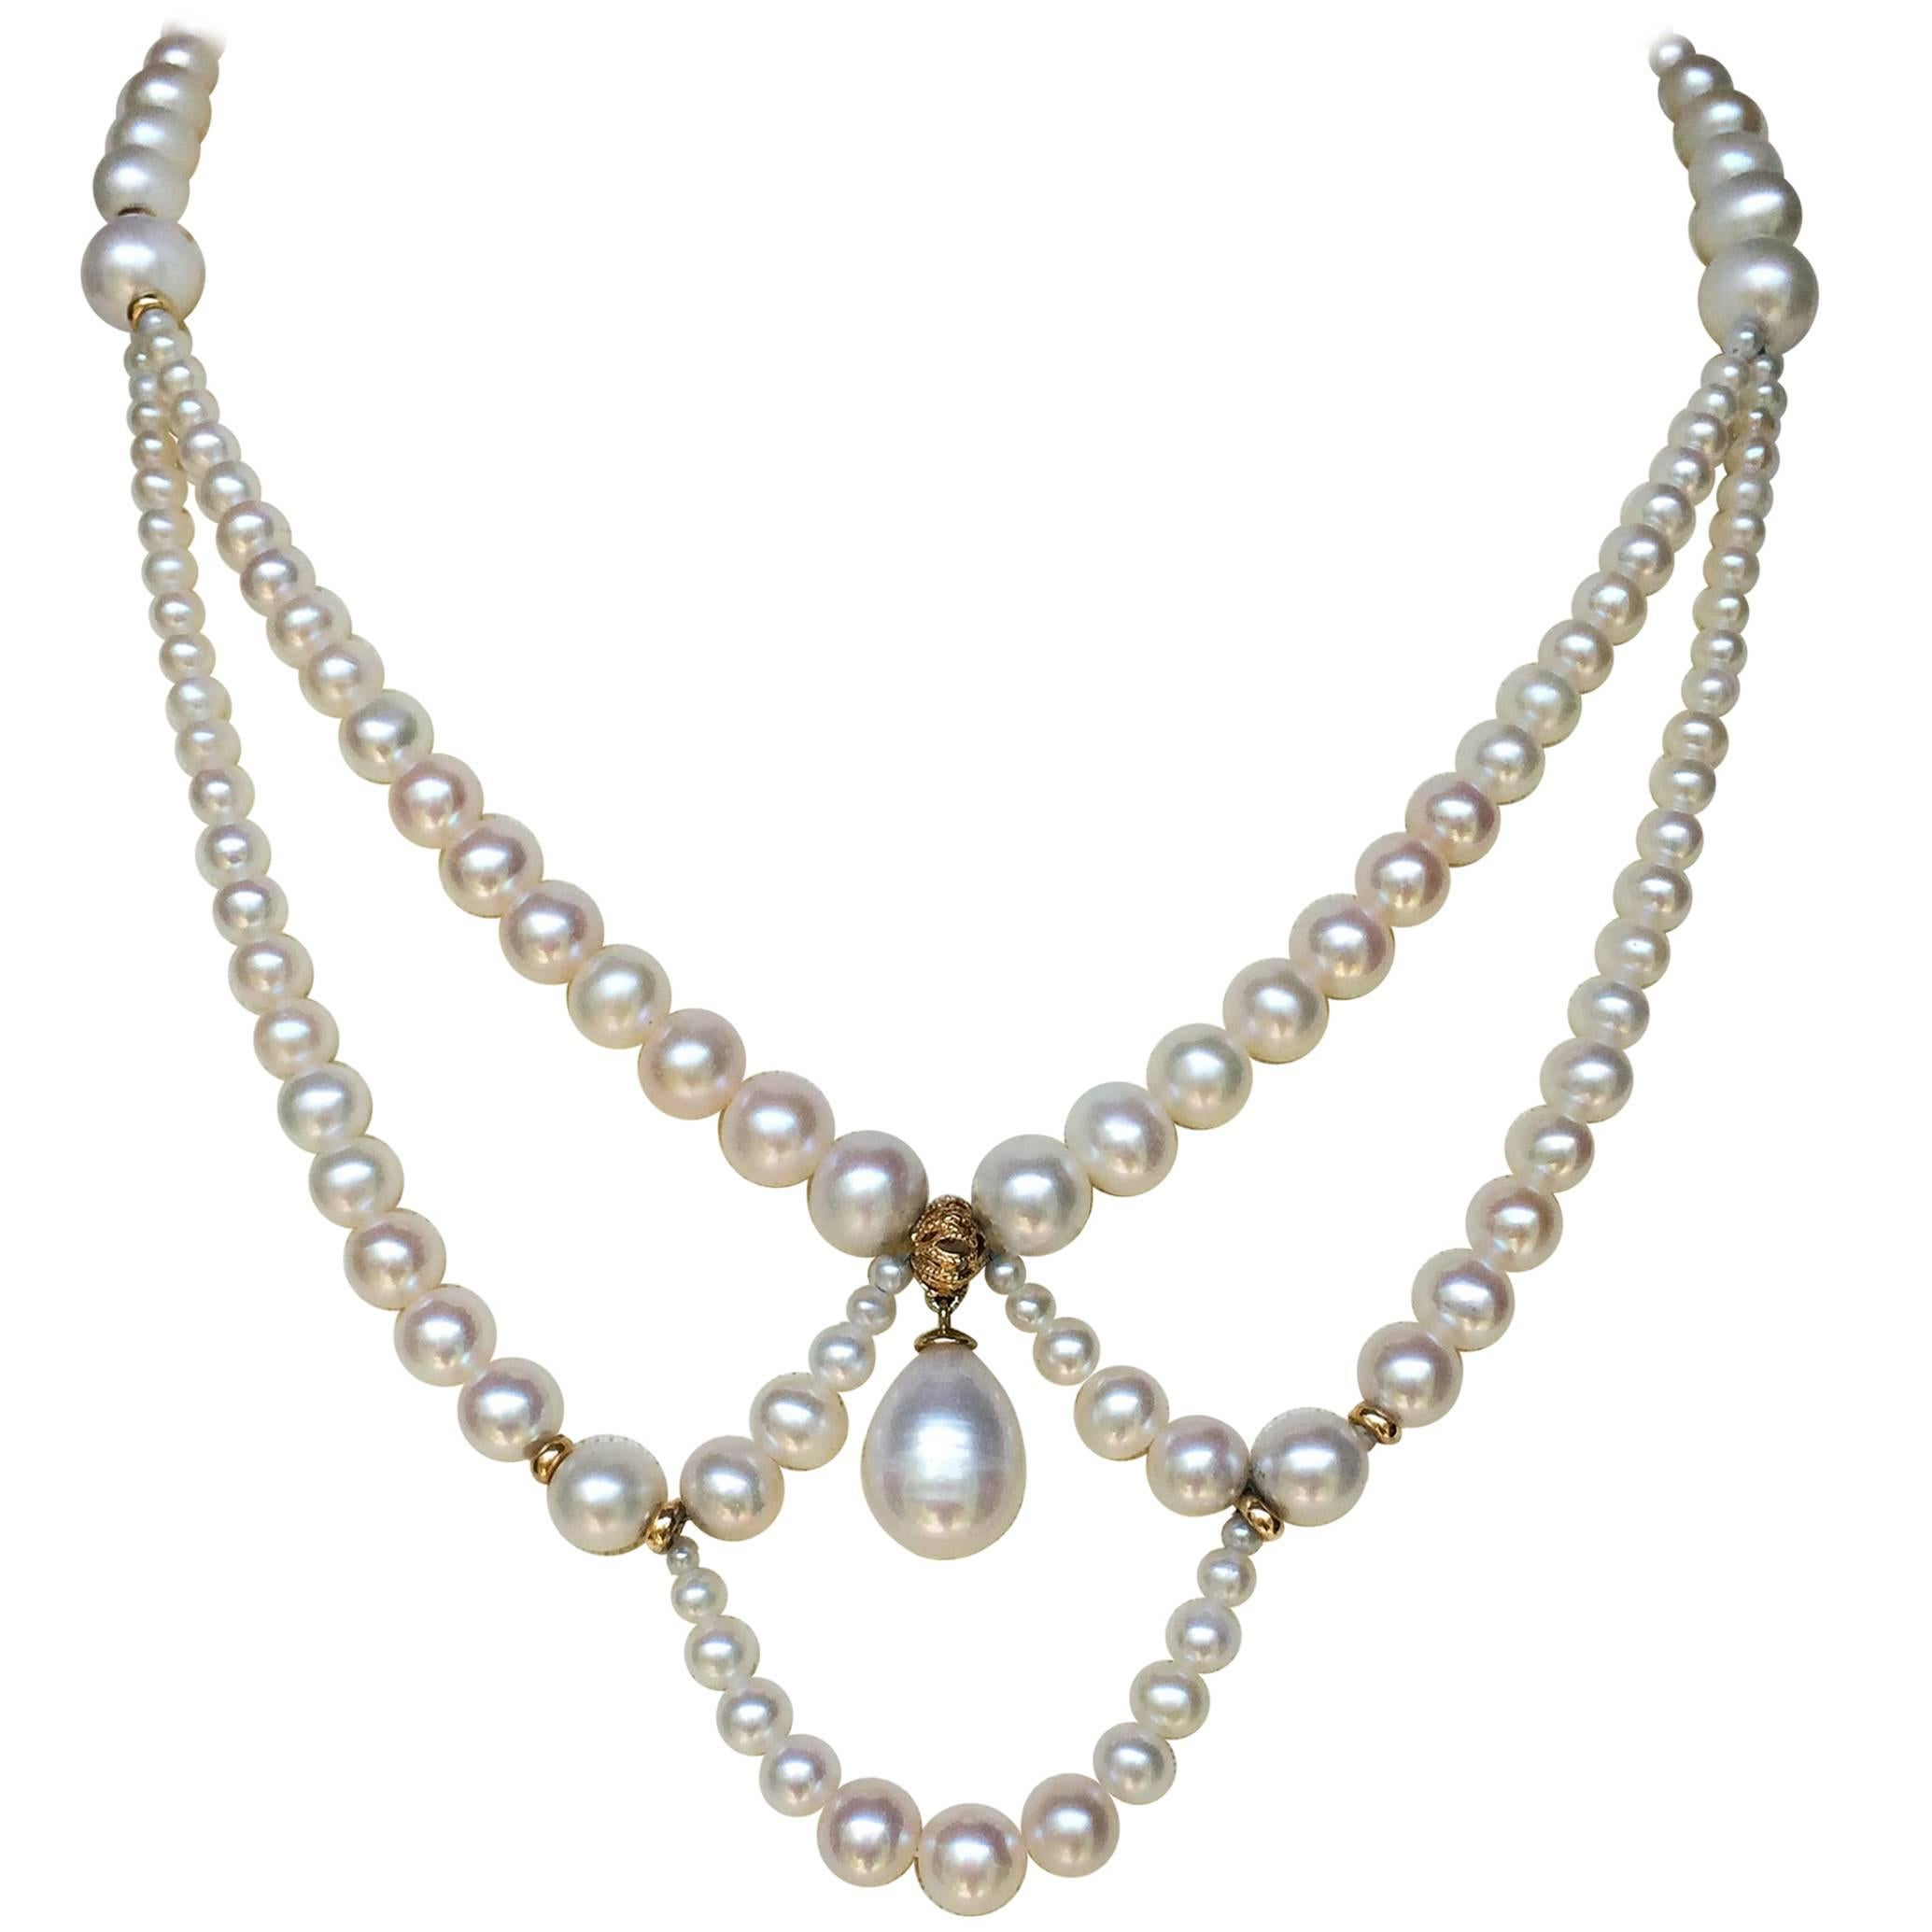 Graduated Pearl Draped Necklace with 14 Karat Gold Beads and Clasp by Marina J